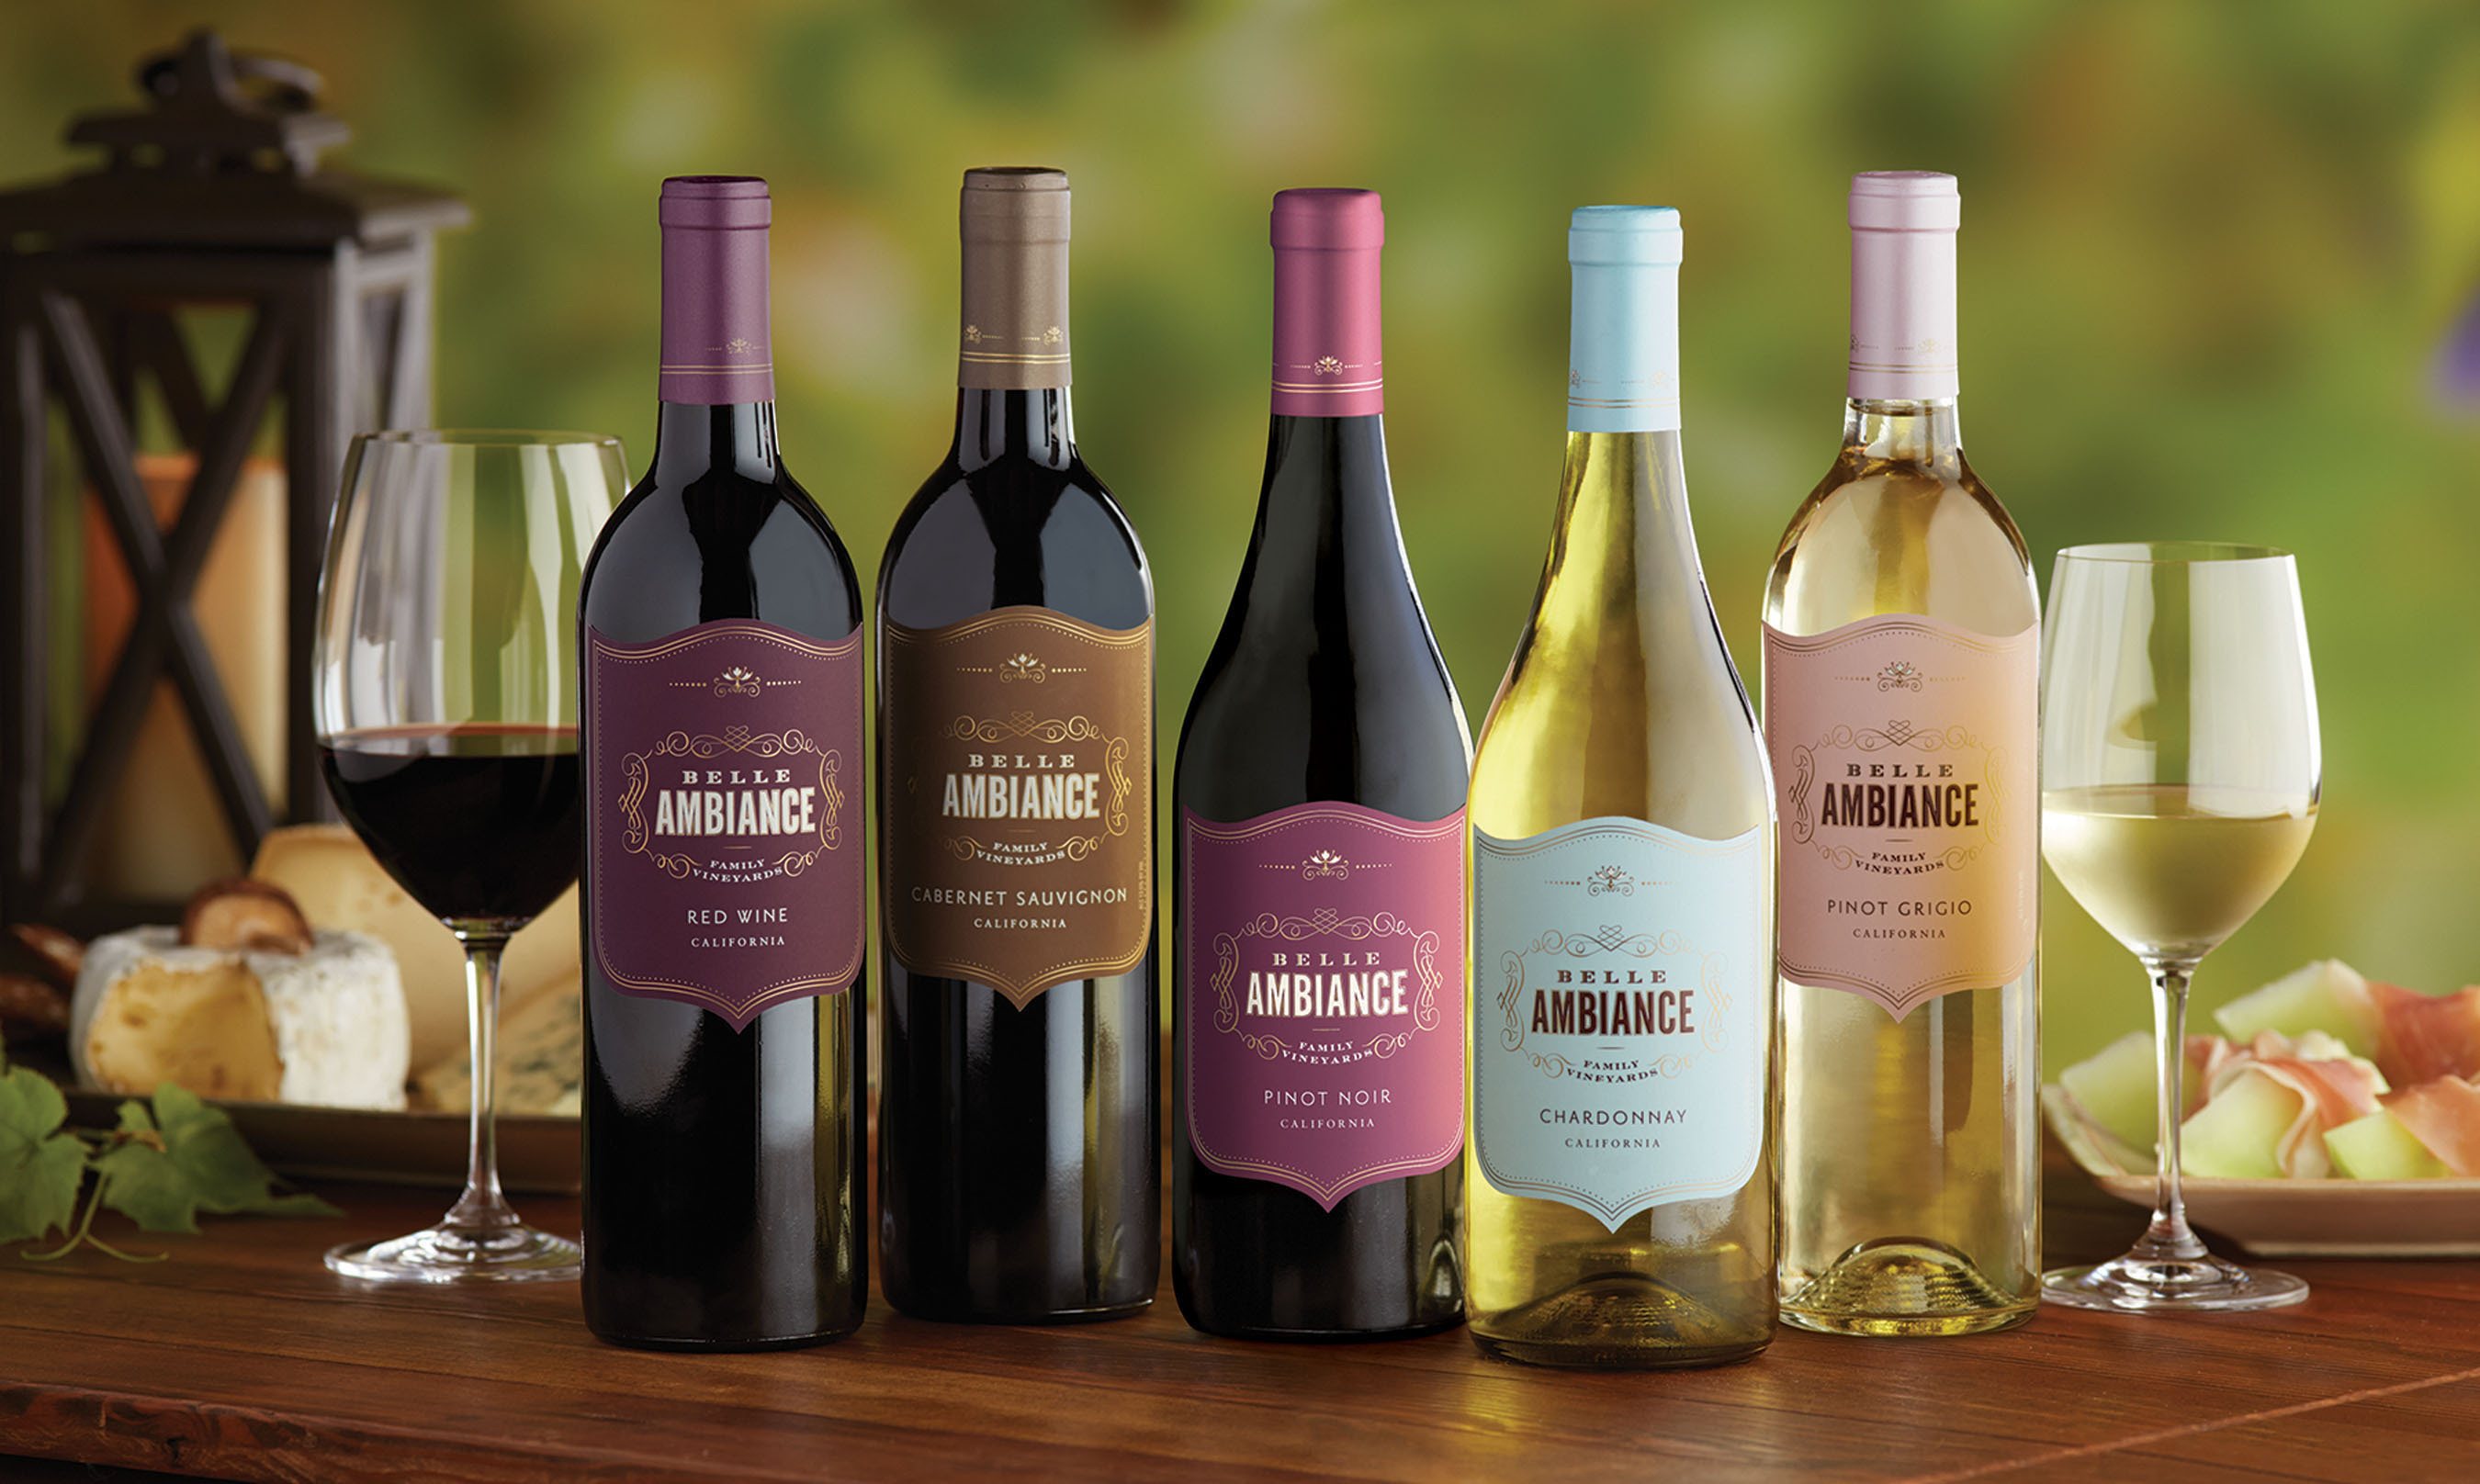 New Entry Belle Ambiance Targets Millennials with Wine Collection Debut. (PRNewsFoto/Delicato Family Vineyards) (PRNewsFoto/DELICATO FAMILY VINEYARDS)